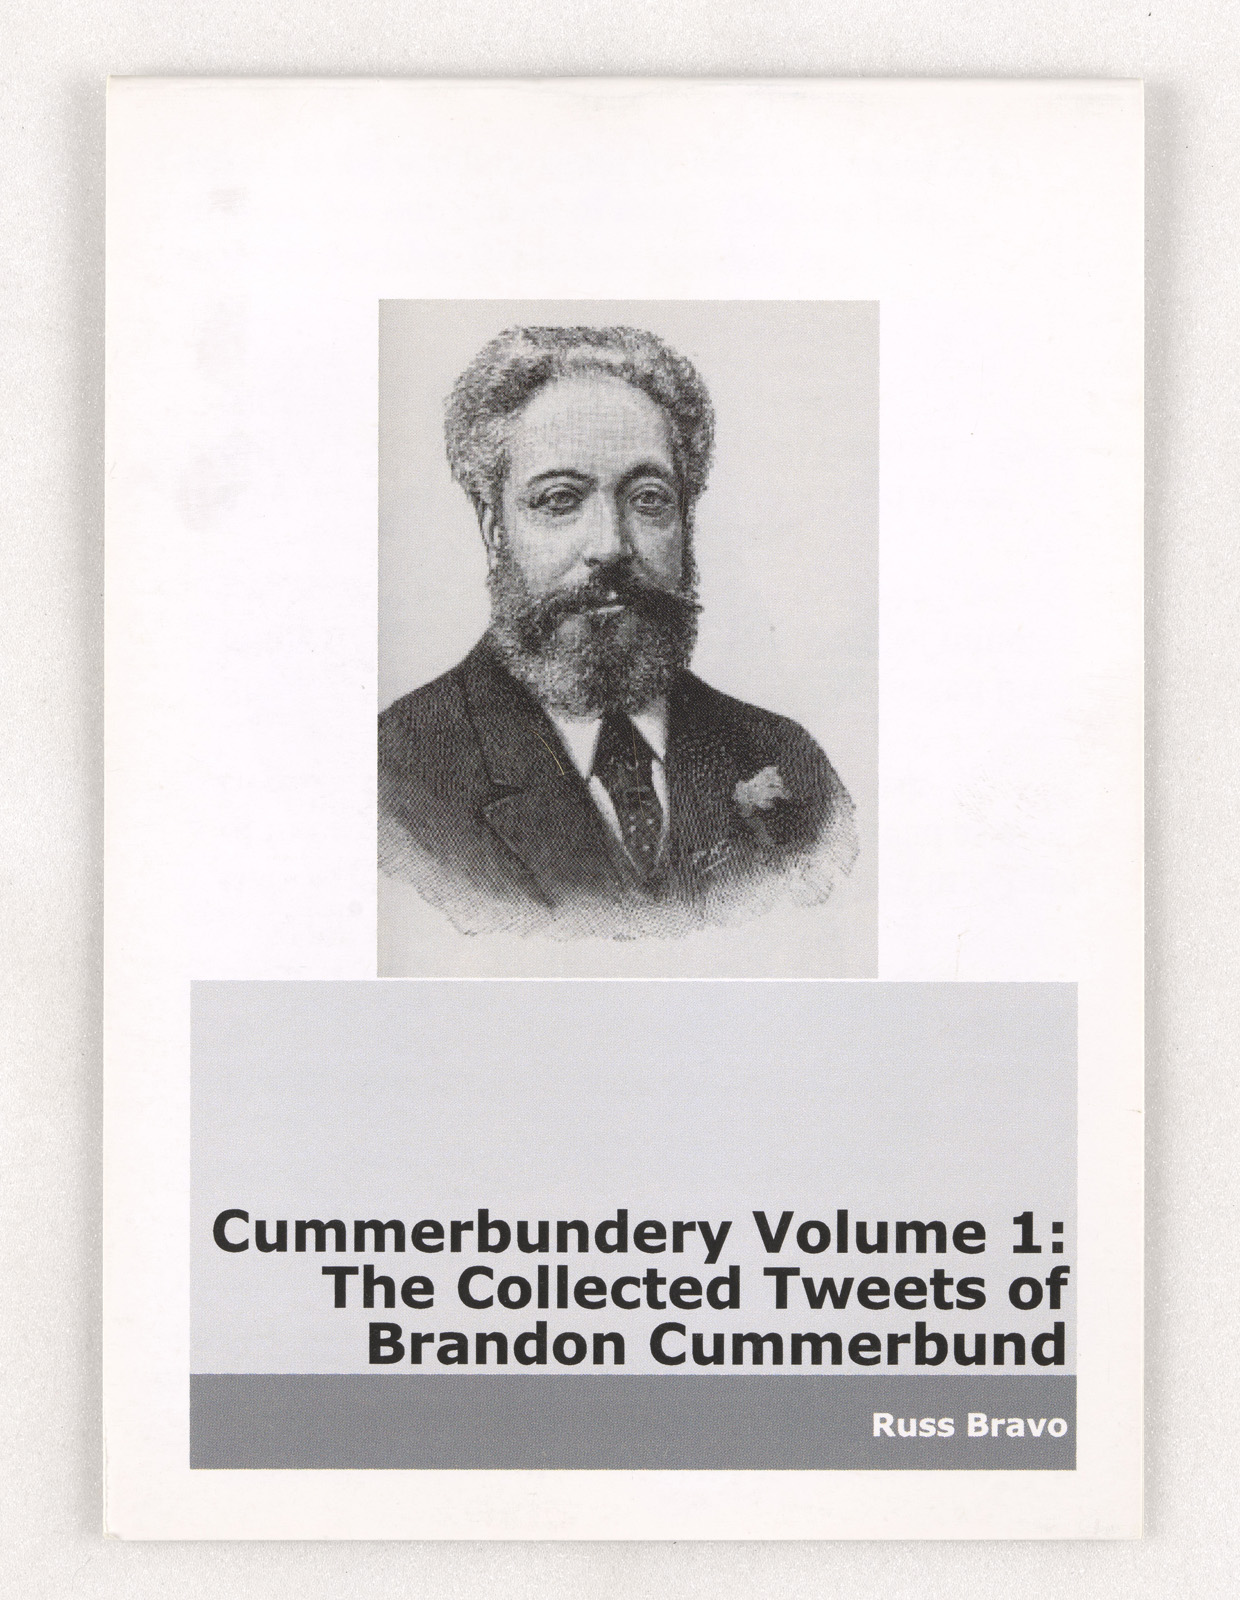 A photograph of the cover of a zine, featuring a portrait of an older man. 